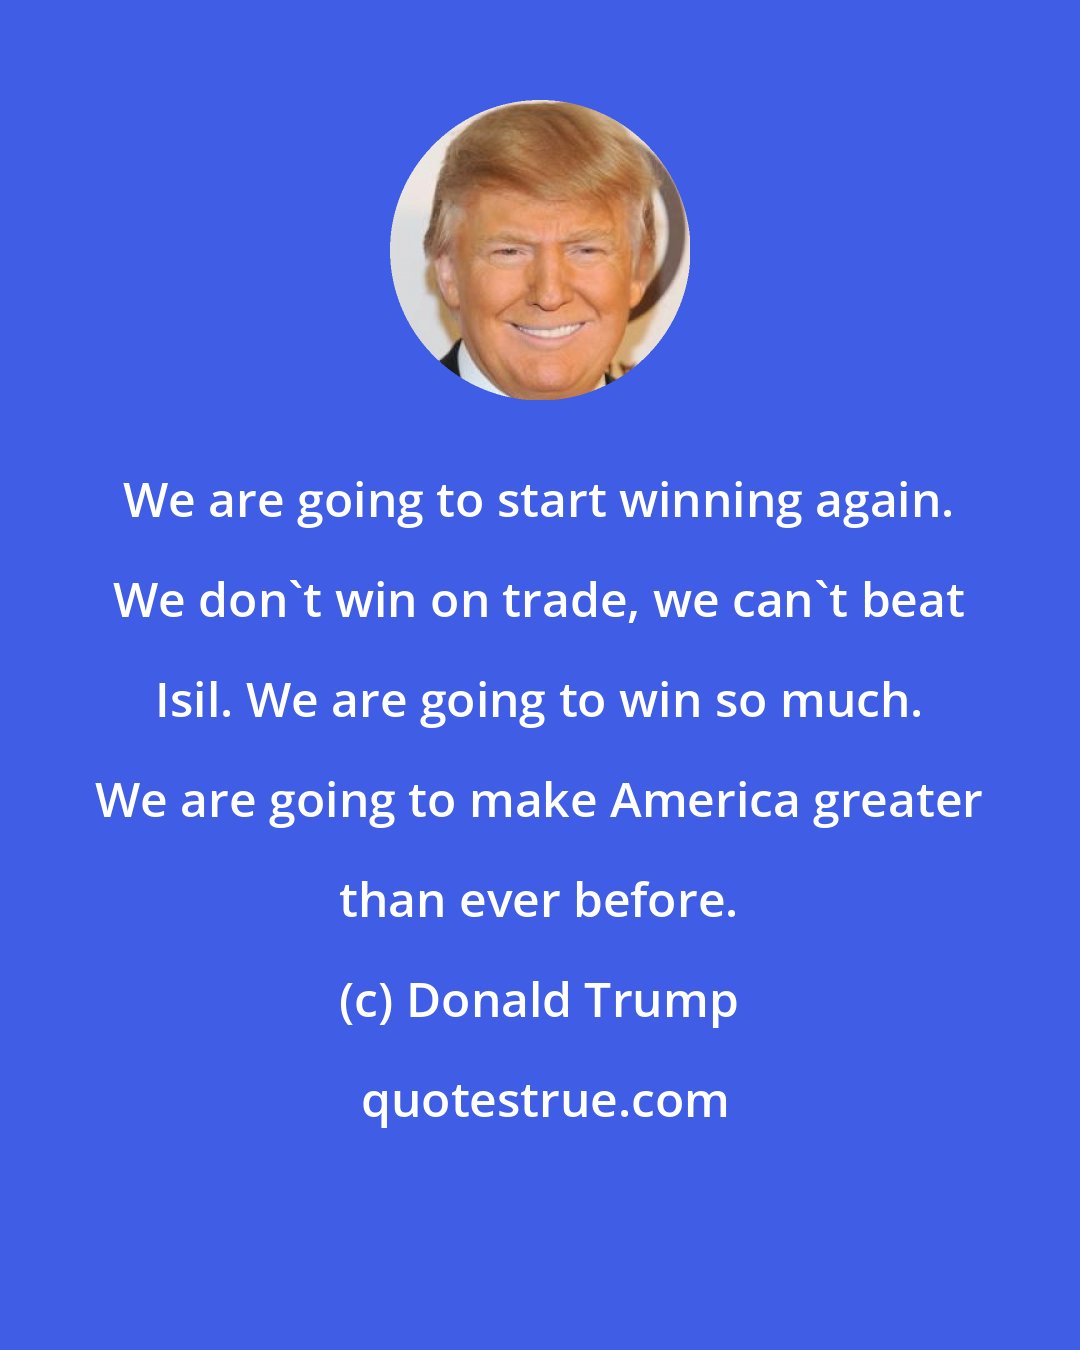 Donald Trump: We are going to start winning again. We don't win on trade, we can't beat Isil. We are going to win so much. We are going to make America greater than ever before.